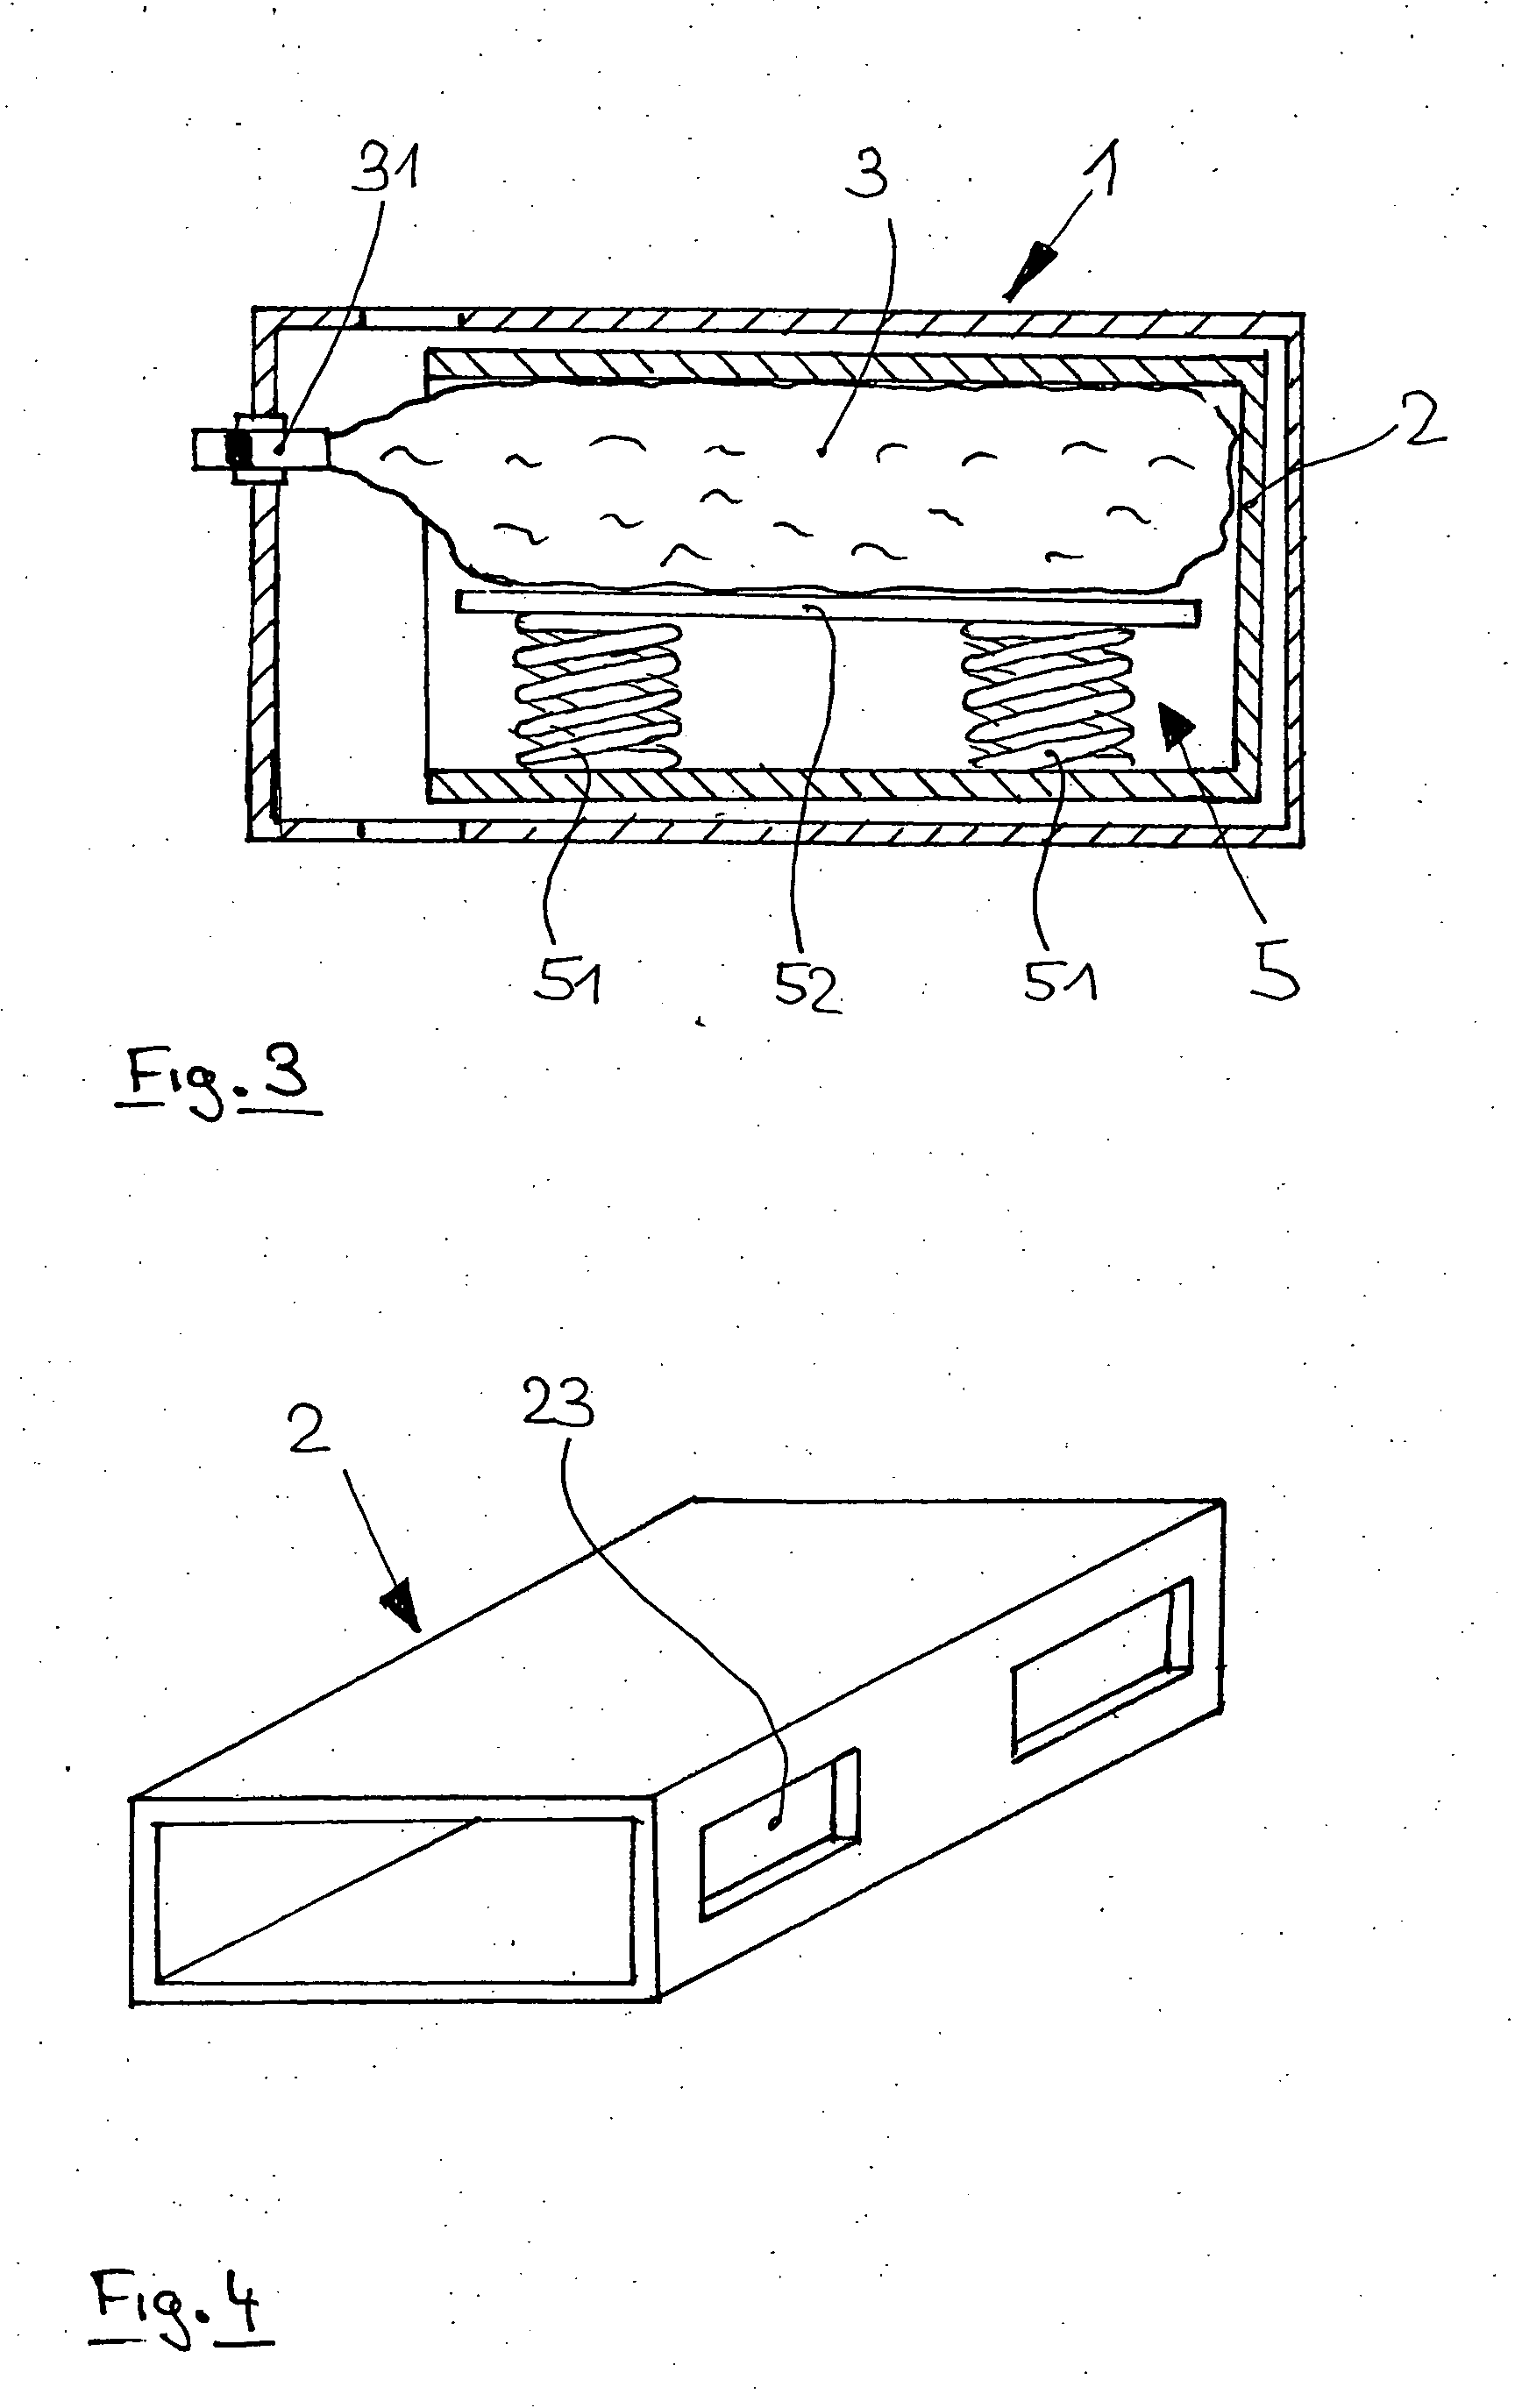 Ink reservoir for automatic recording, writing, and drawing devices